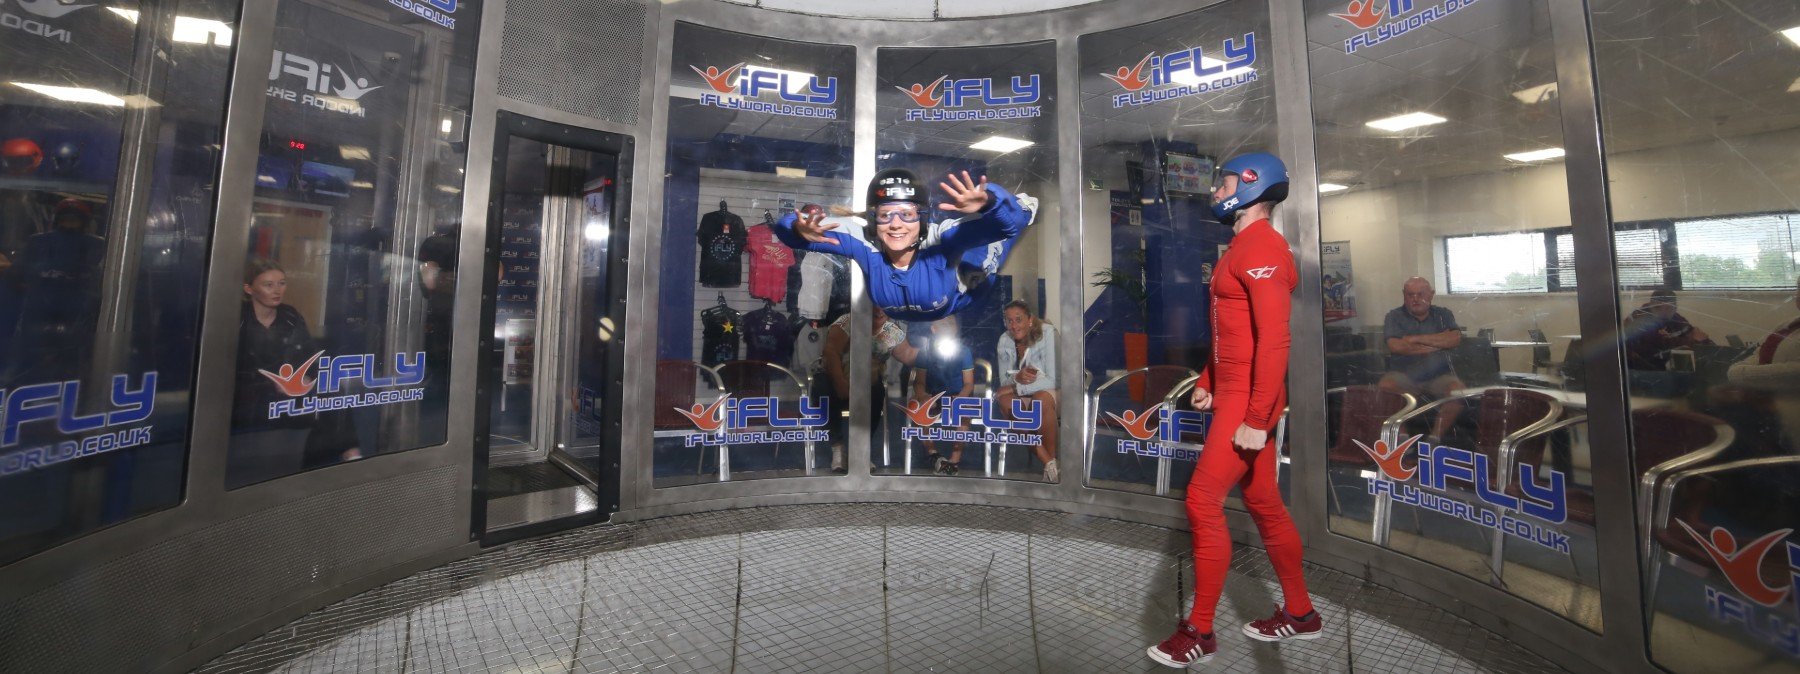 We Tried Indoor Skydiving | This Is What Flying Feels Like